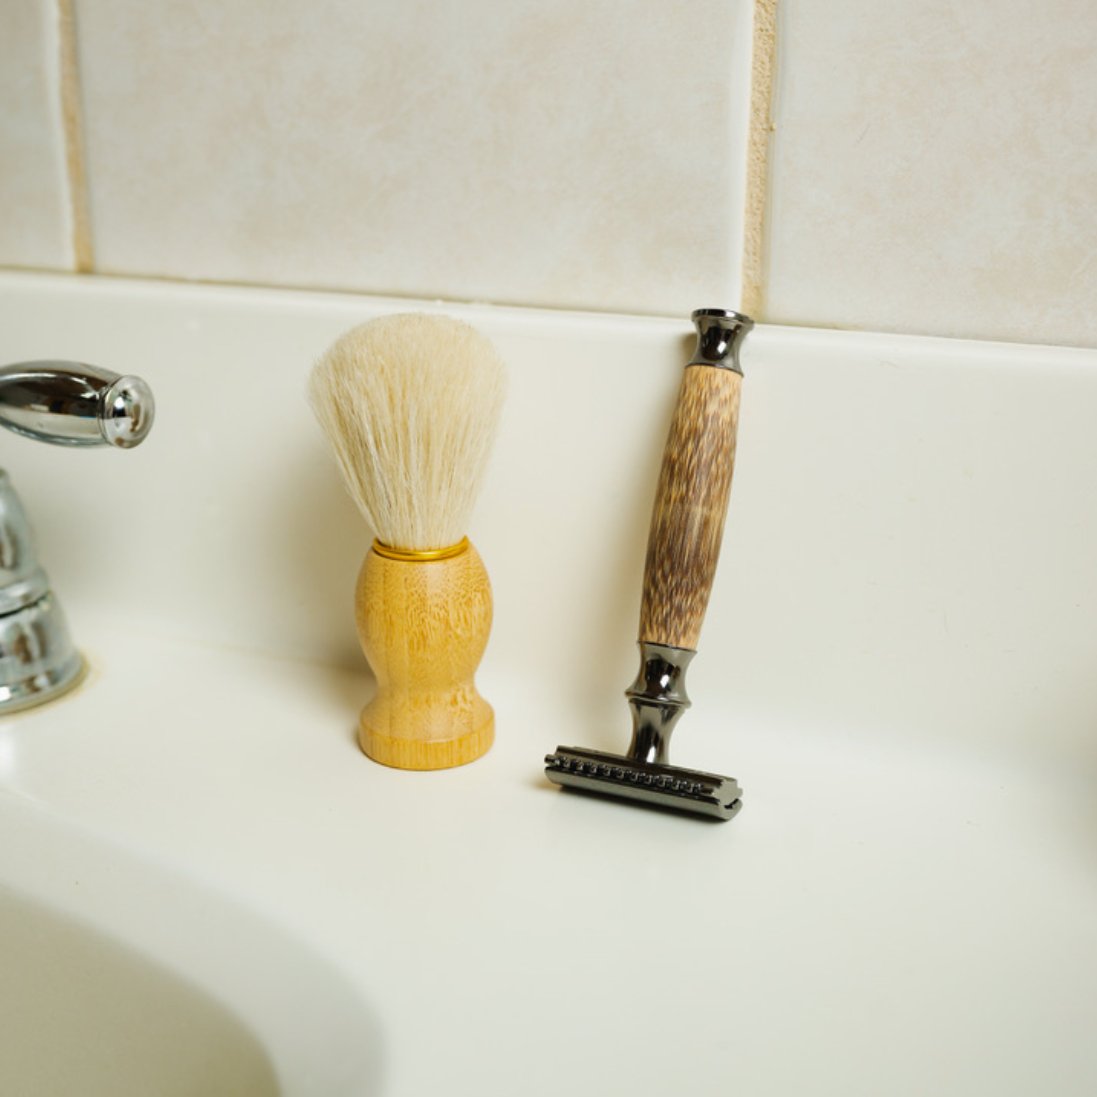 sustainable, zero waste, earth-friendly, plastic-free Natural Bristle Shave Brush | Men's Shaving - Bamboo Switch